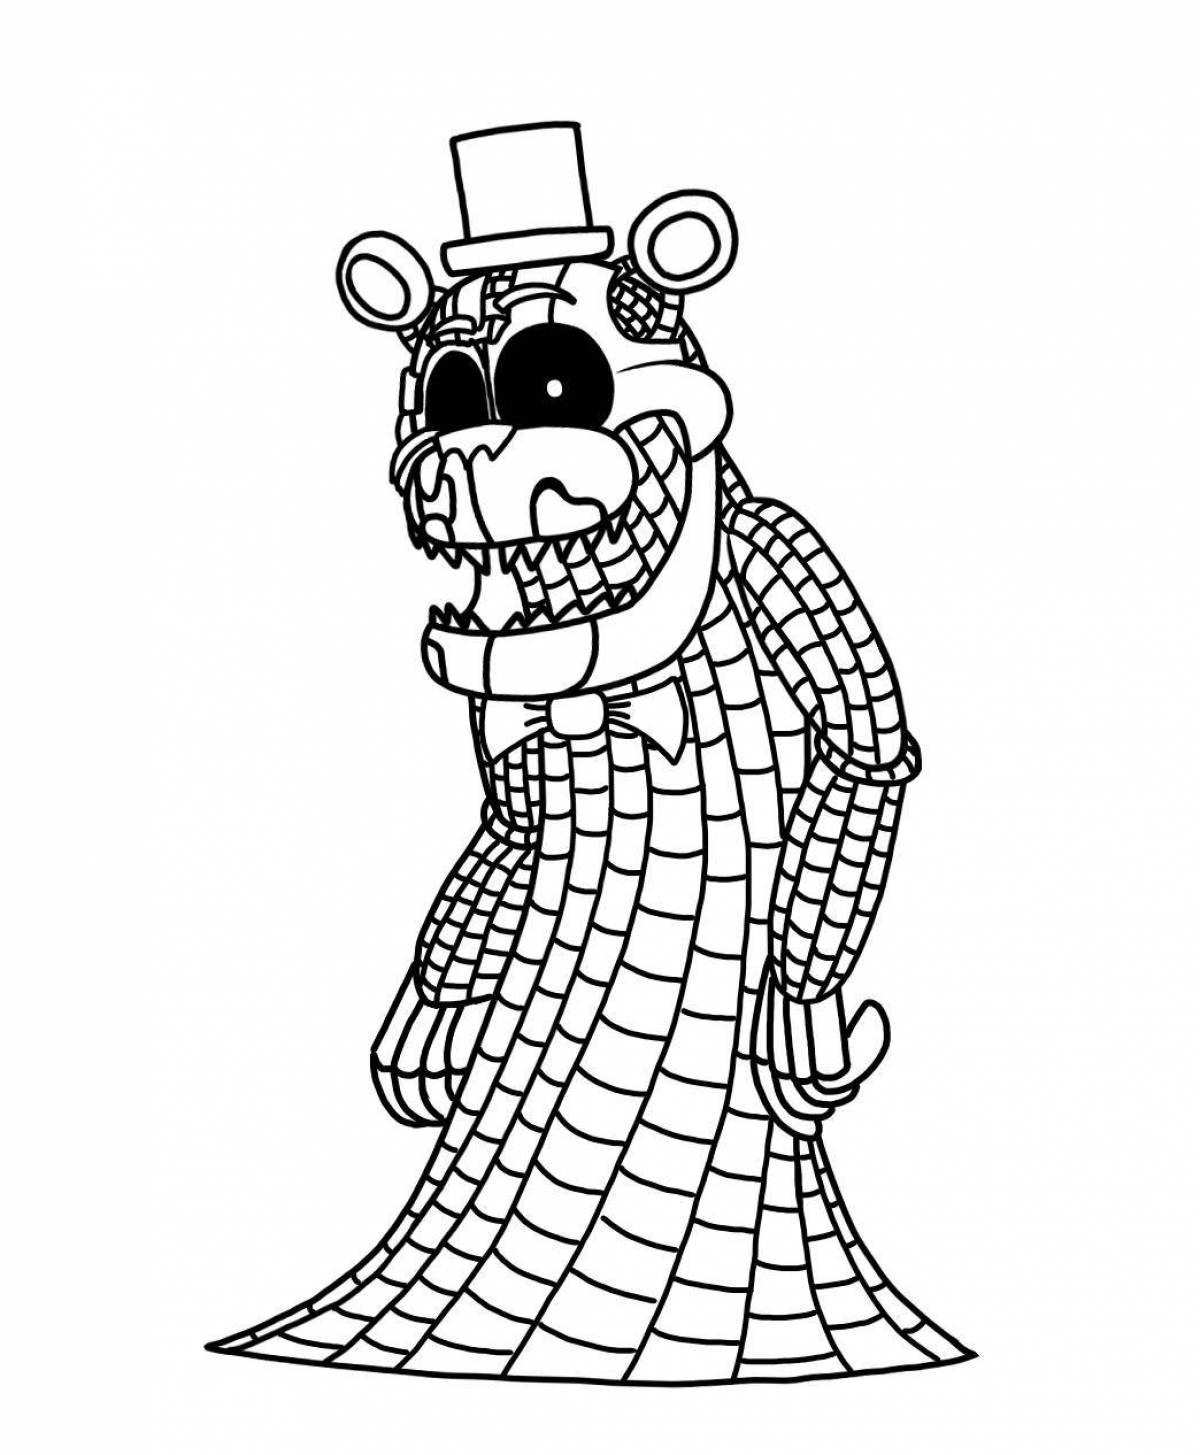 Glorious melted freddy coloring page